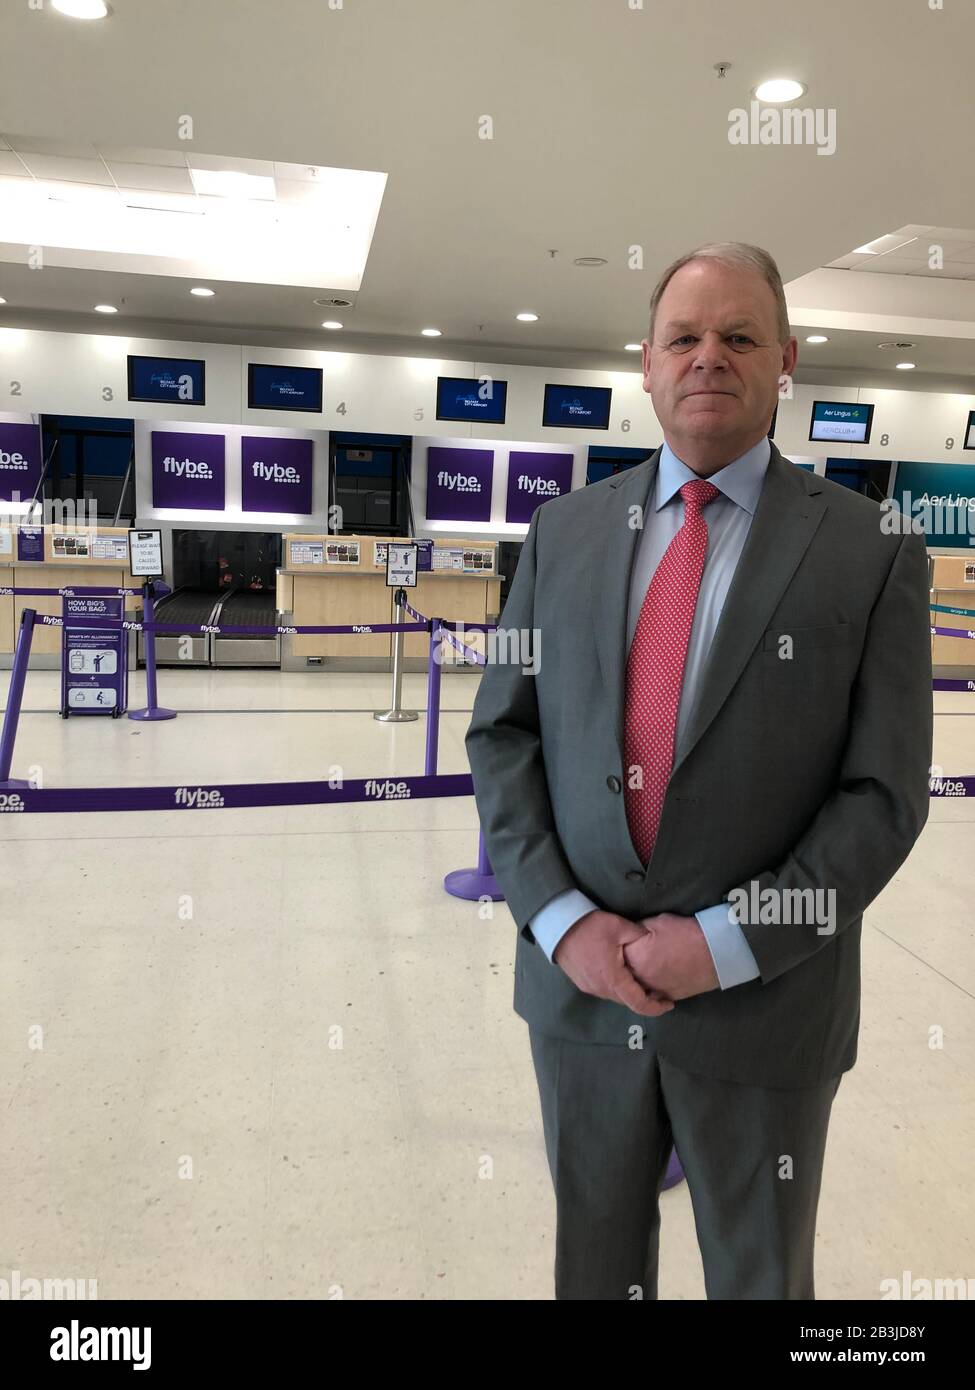 Chief executive of Belfast Airport, Brian Ambrose, speaks to the media in front of the empty Flybe check-in desks at Belfast Airport after Europe's biggest regional airline collapsed into administration. Stock Photo